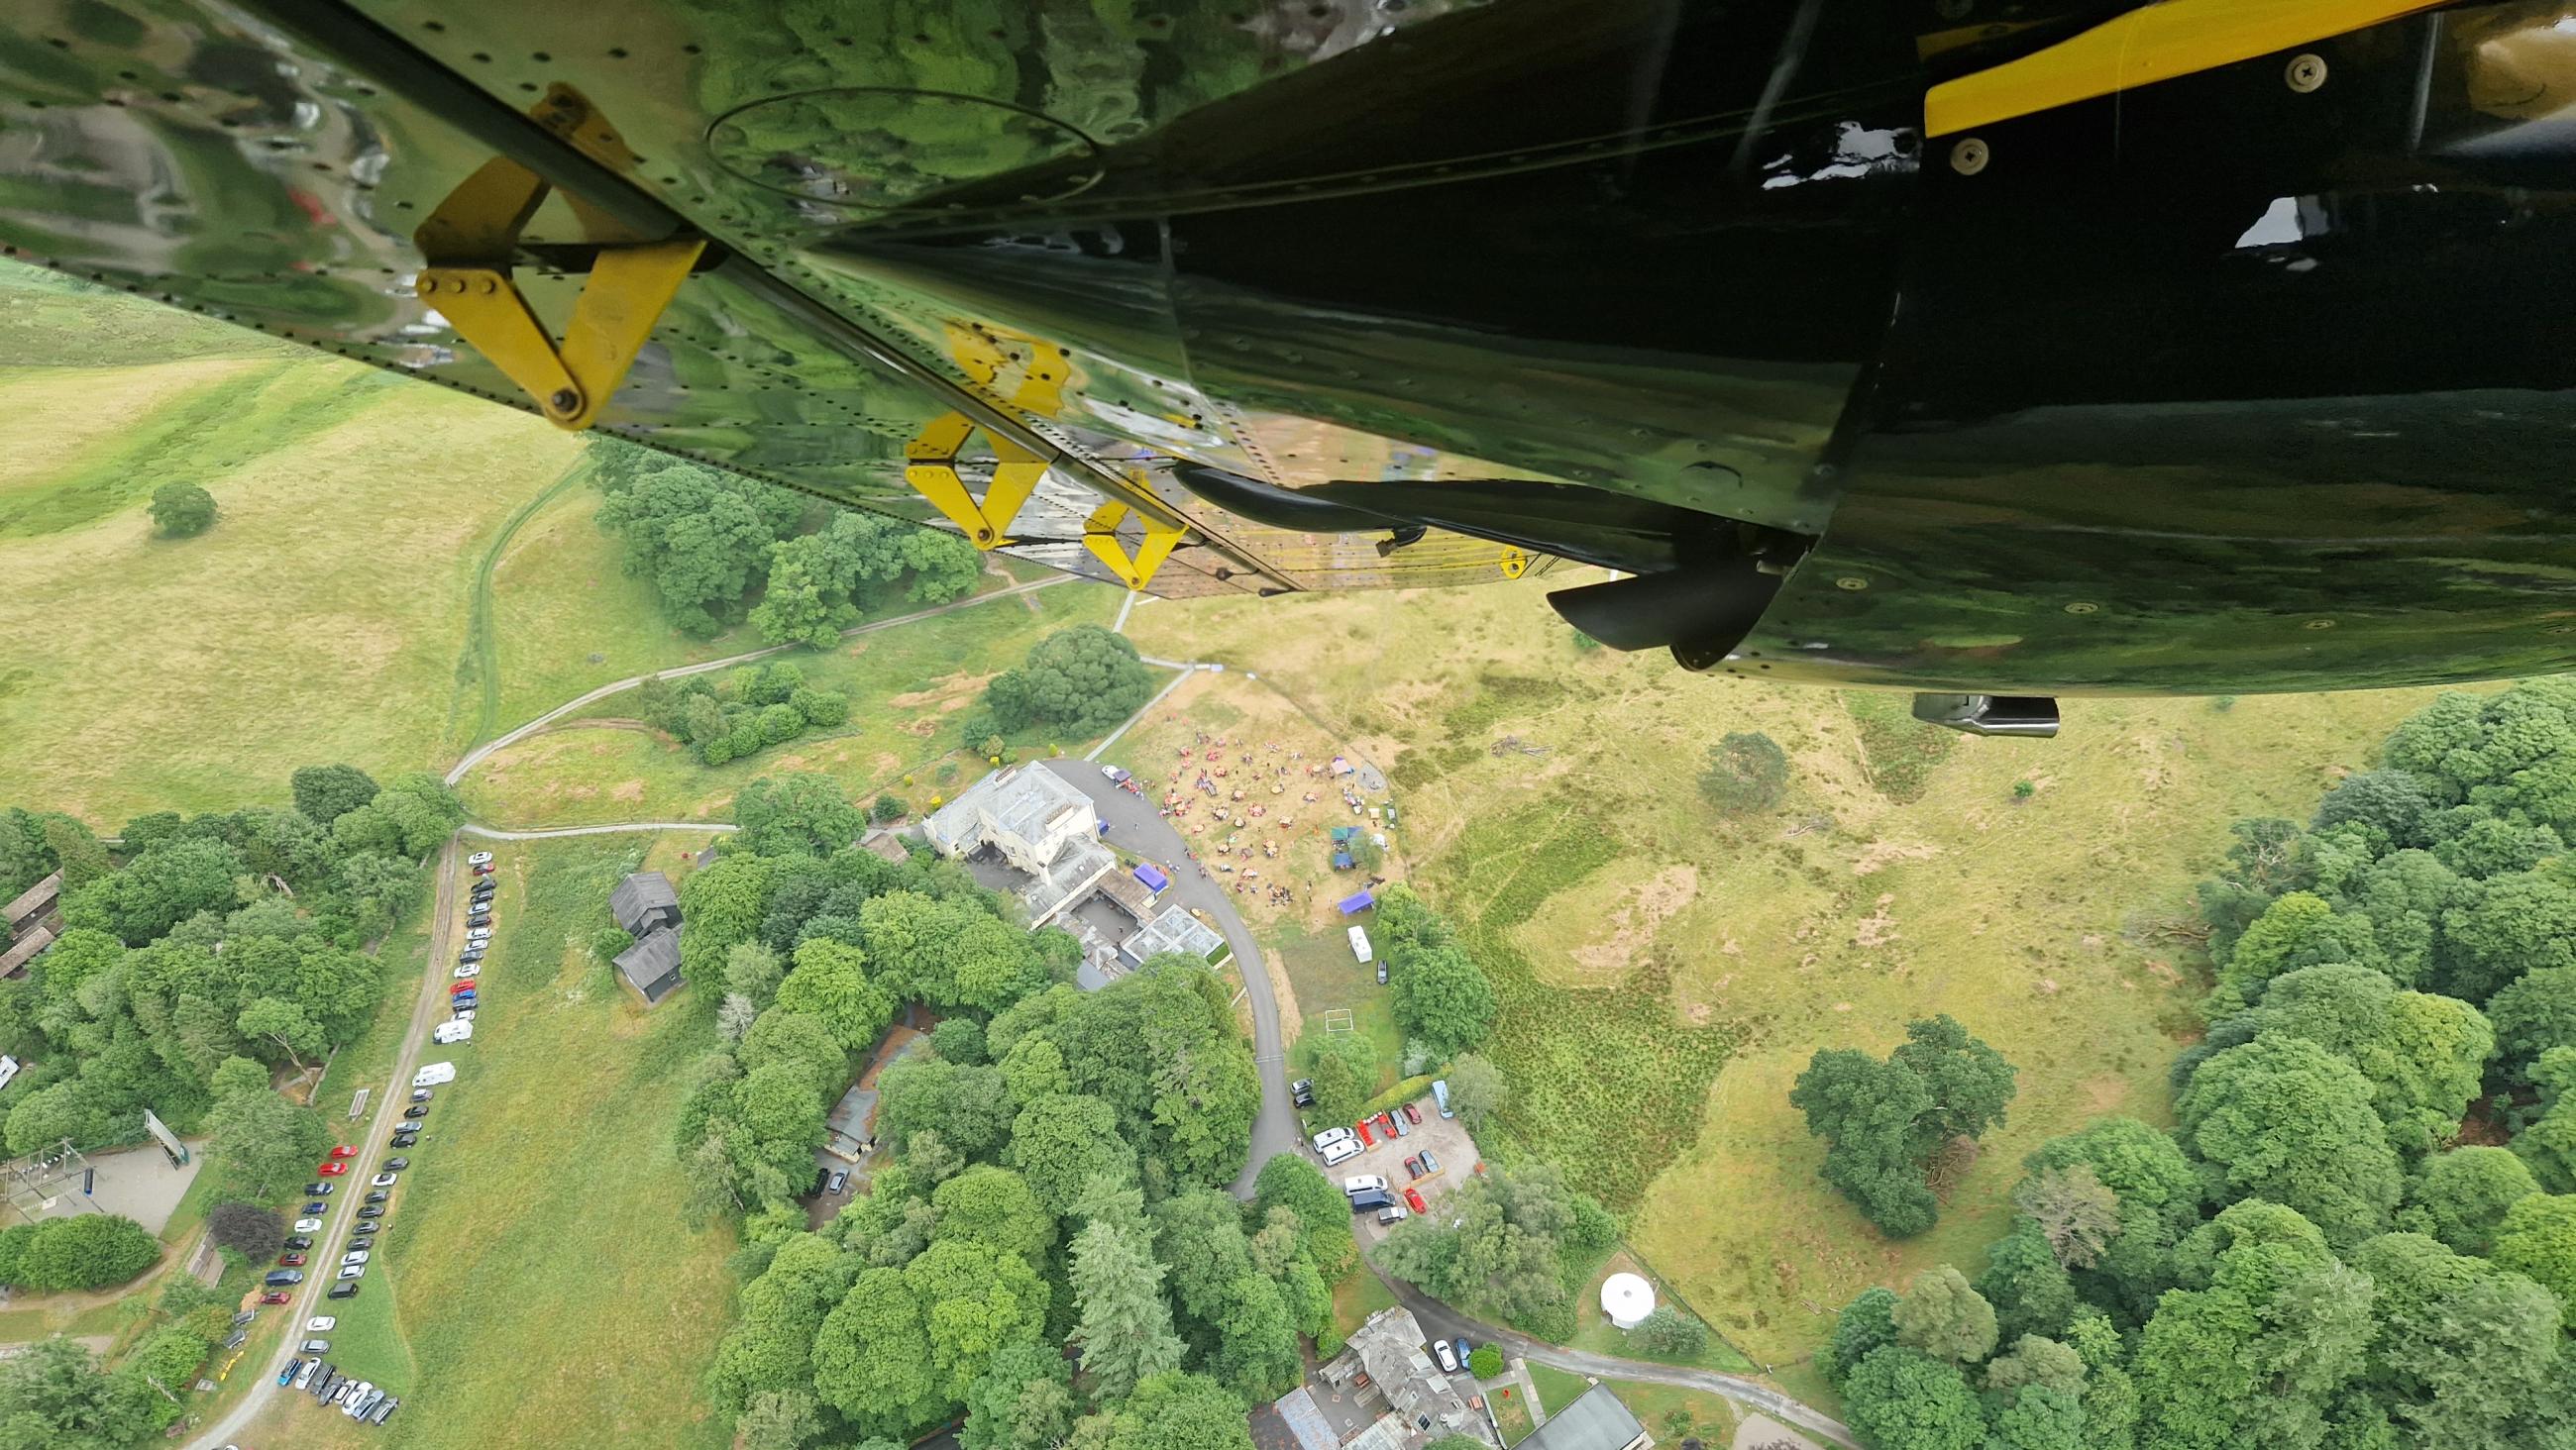 View of Ambleside, Cumbria, taken from police aeroplane